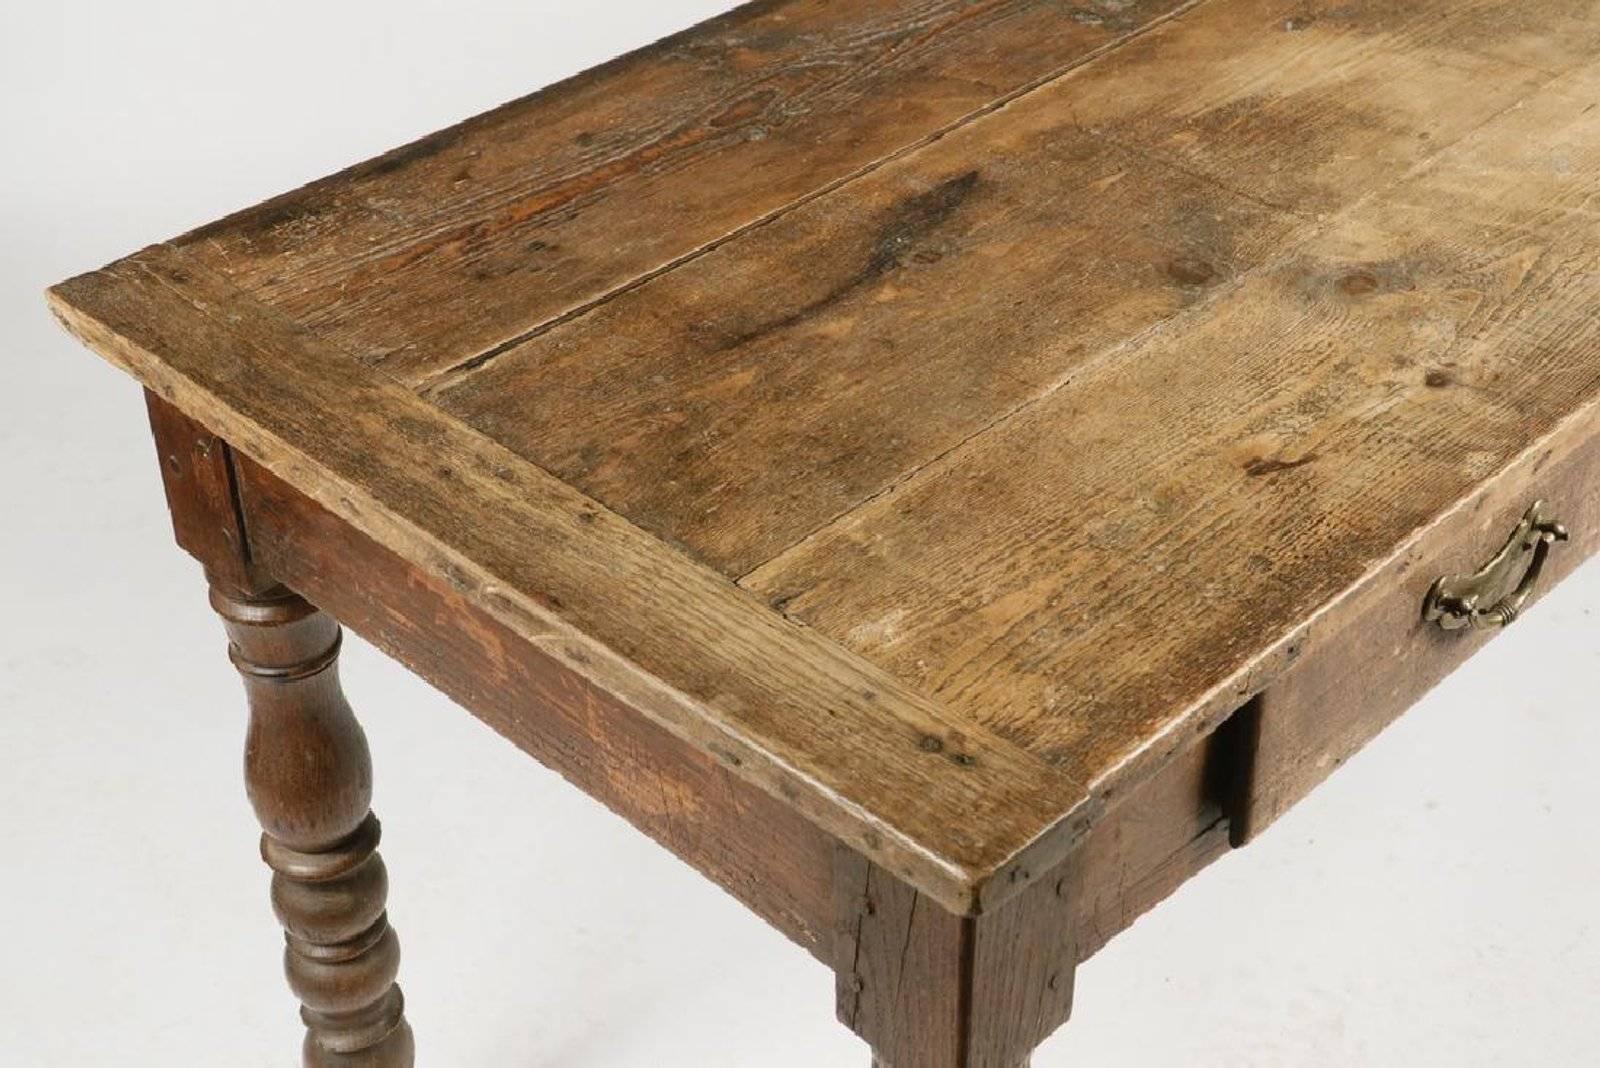 19th century English (possibly Irish) pine and oak long hall or farm table; three plank top with breadboard ends, four drawers (one side) with bronze pulls, bulbous ring and urn turned legs.


Dimensions: 28